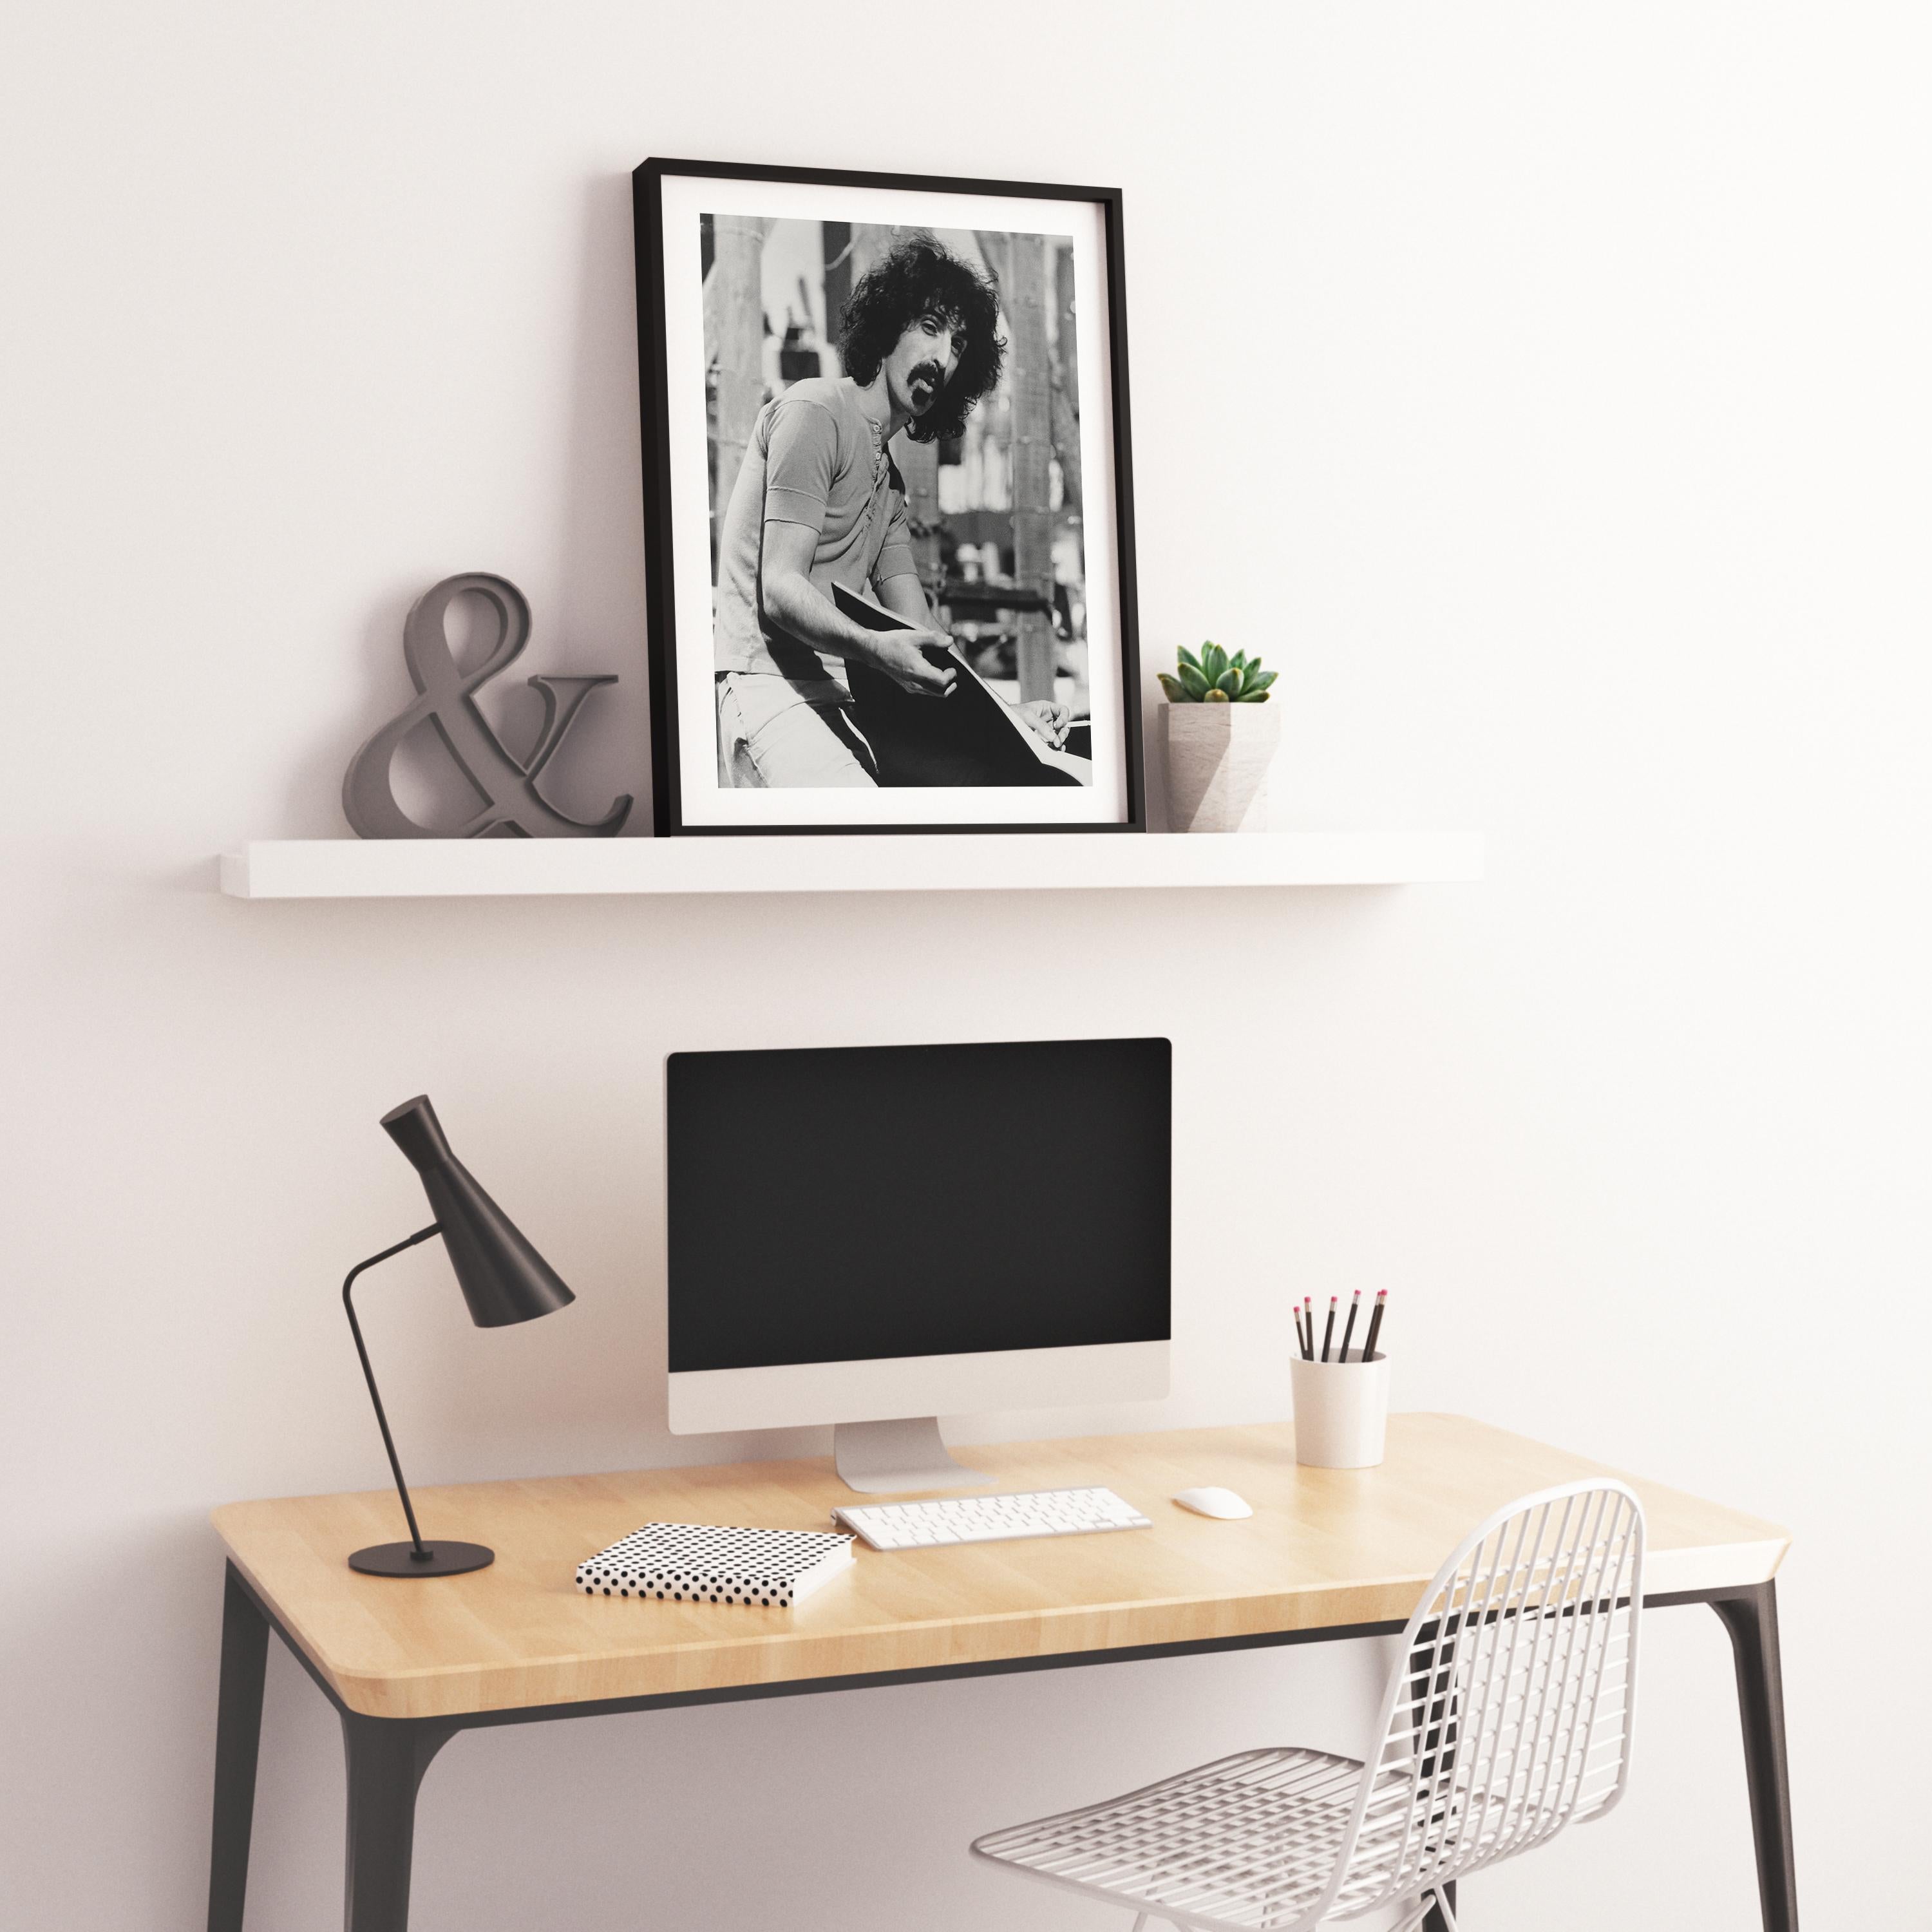 Frank Zappa the Legendary Musician Candid Globe Photos Fine Art Print - Gray Black and White Photograph by Unknown